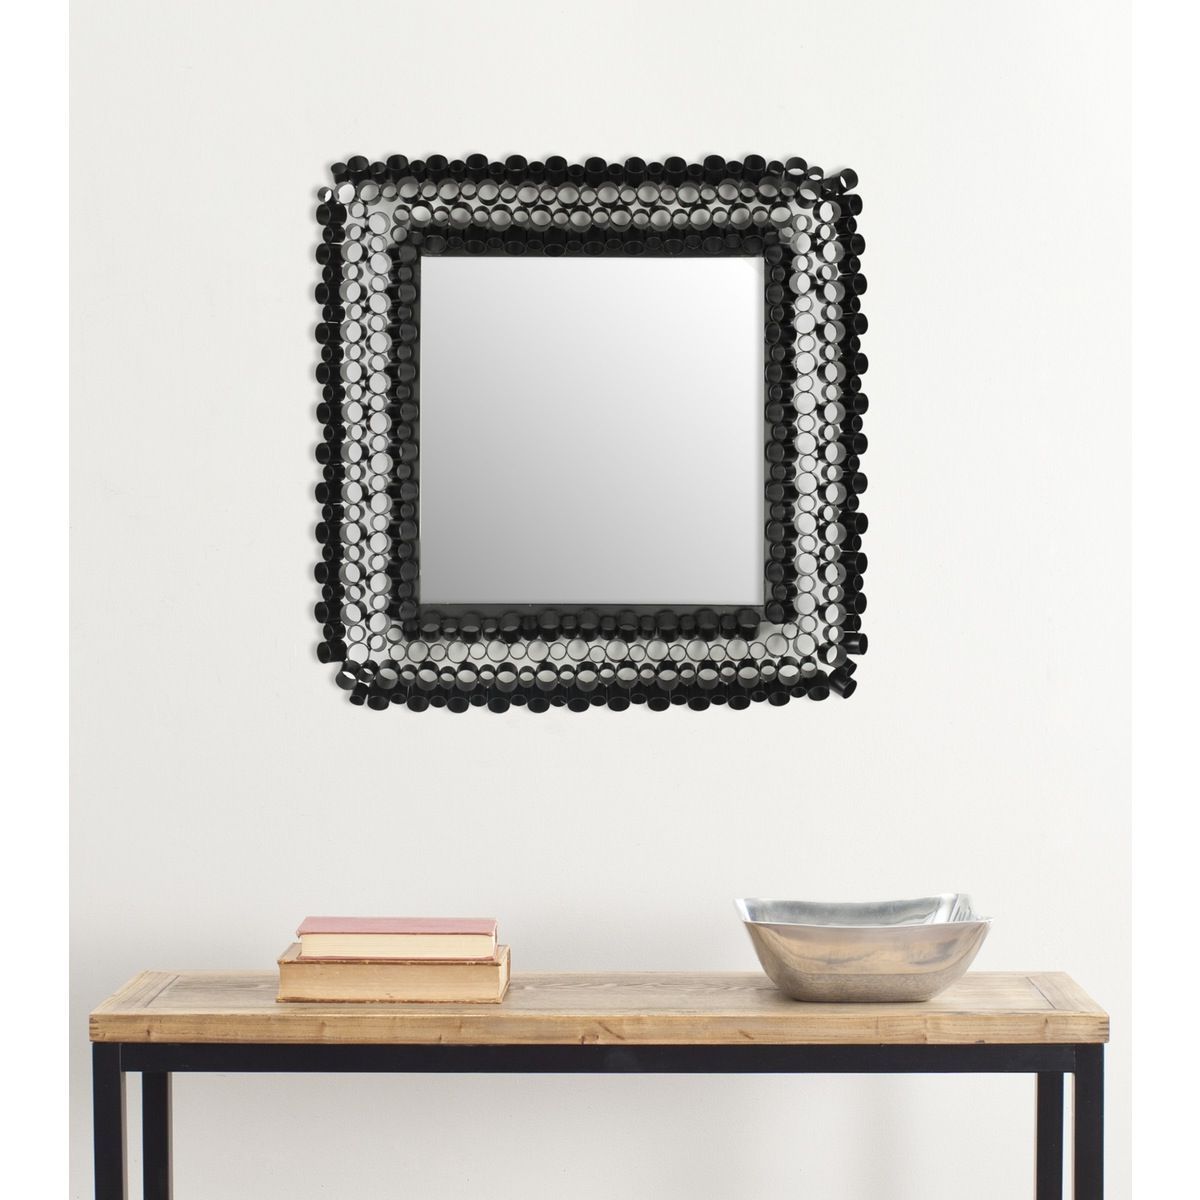 Square Modern Wall Mirrors In Most Current The Square Tube Mirror, With Its Dark Glossy Finish, Makes A (View 3 of 15)